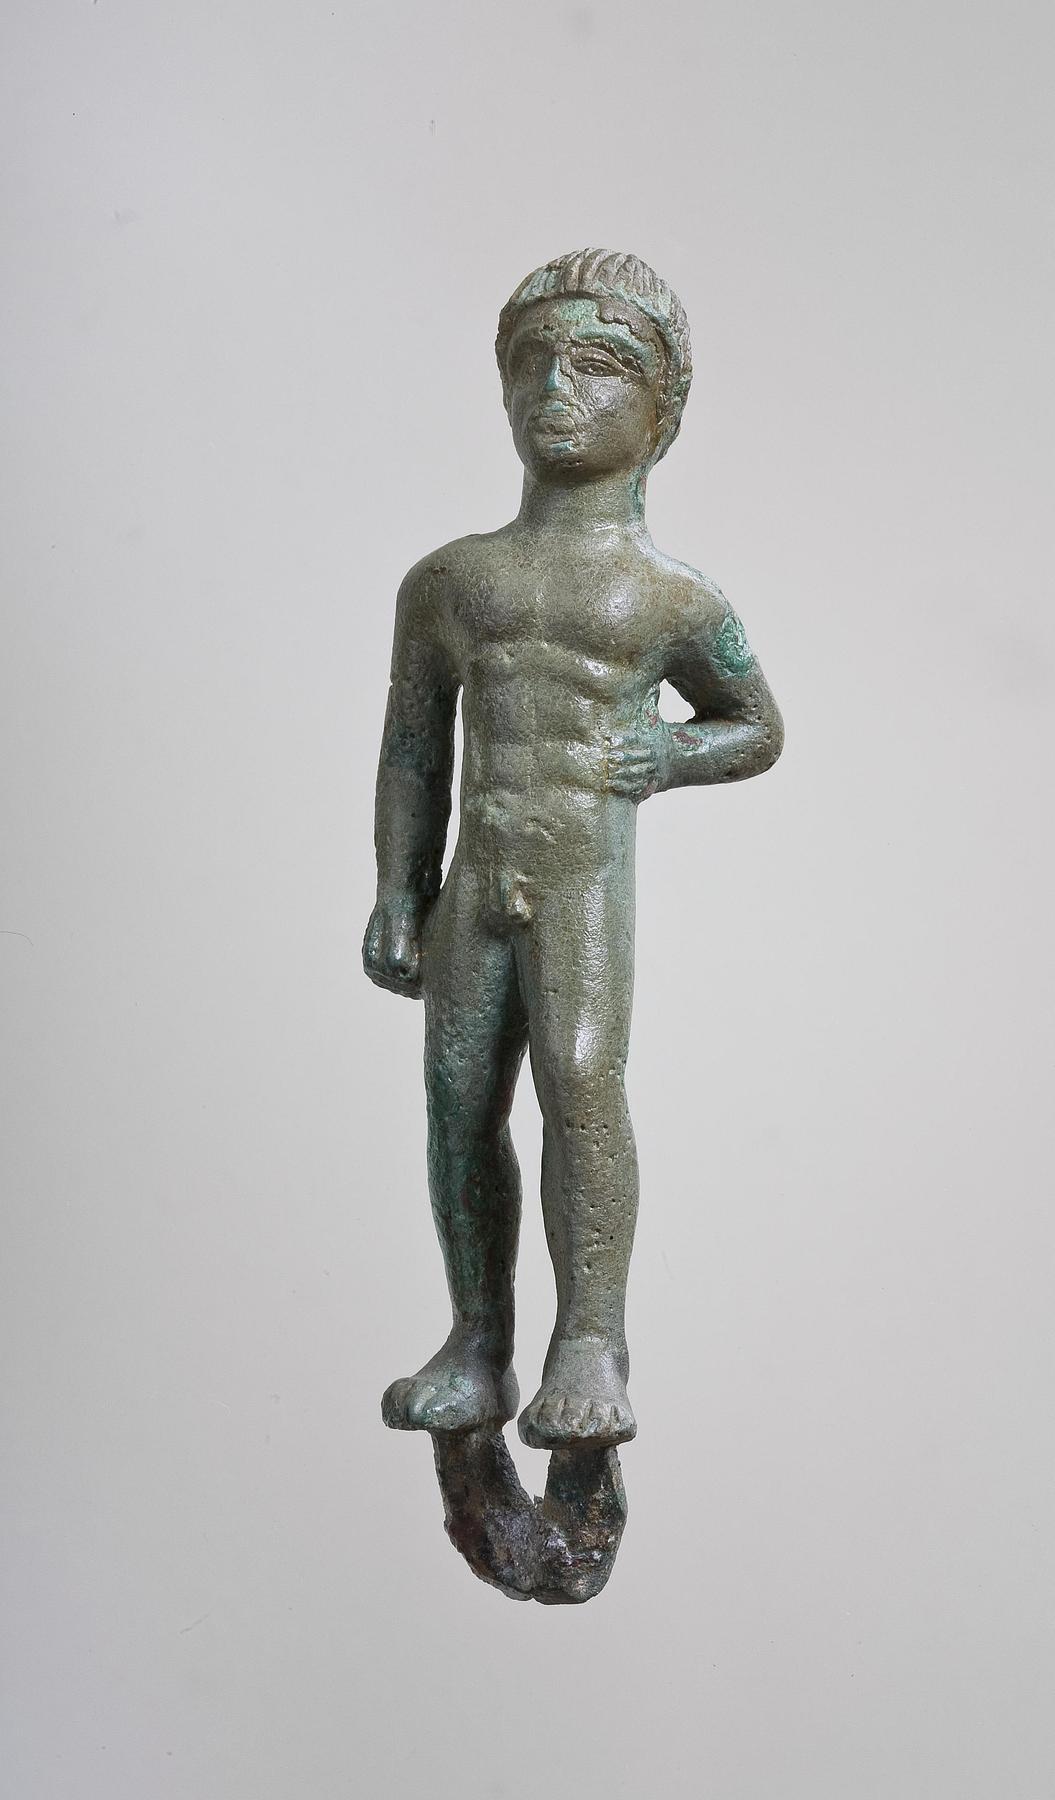 Statuette of an athlete, H2016